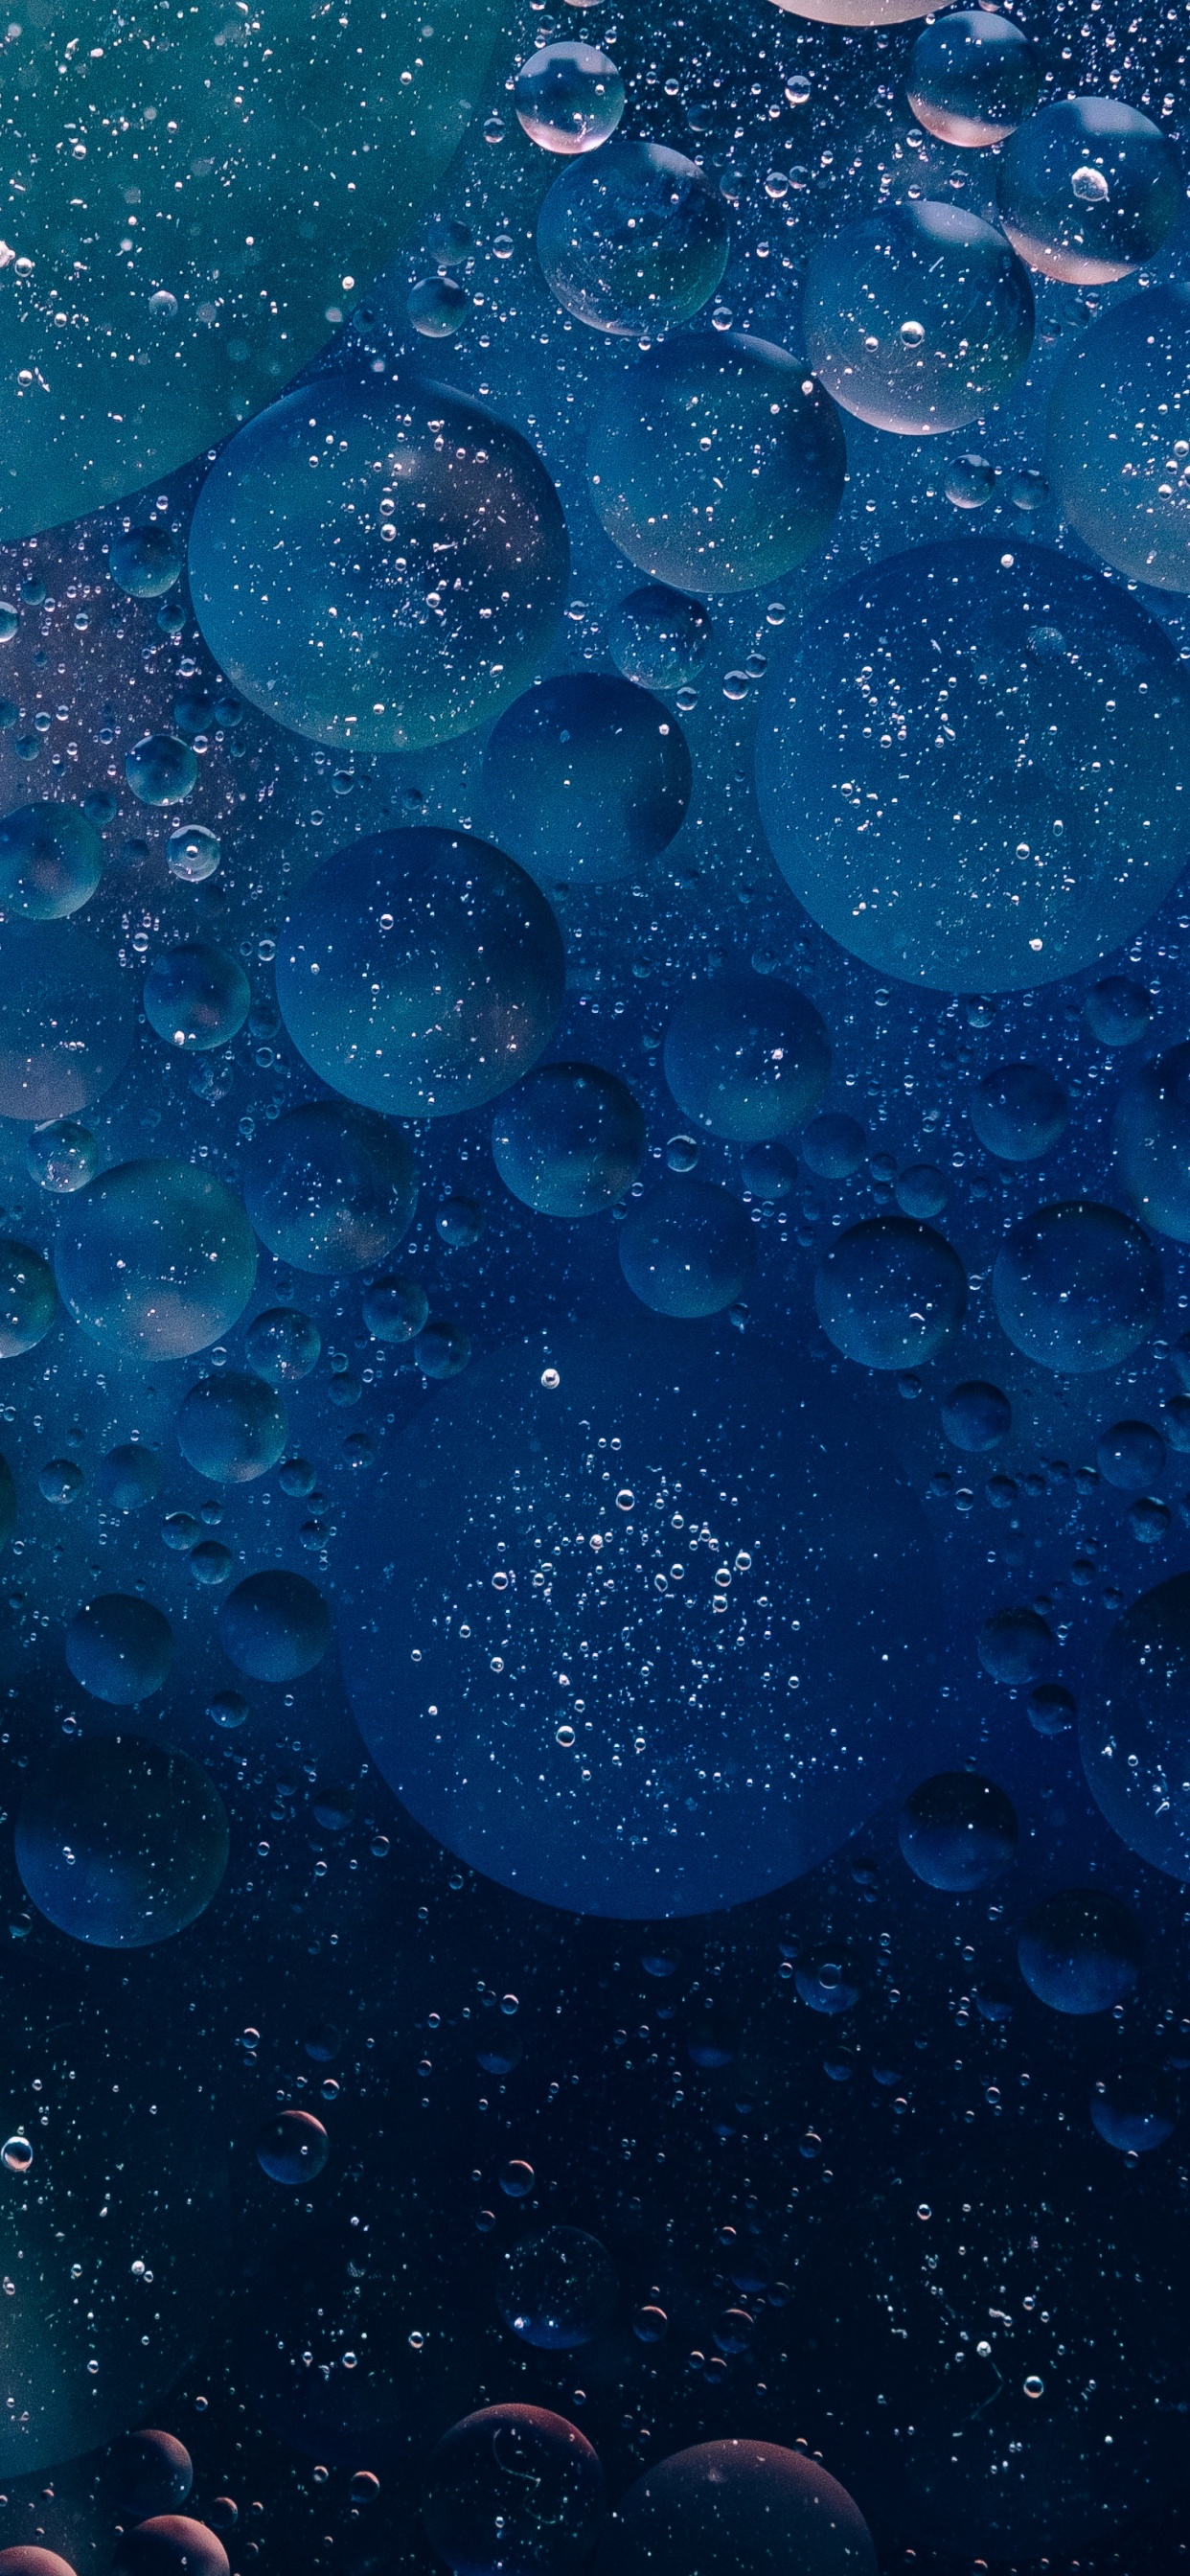 Water Droplets on Glass Panel. Wallpaper in 1242x2688 Resolution